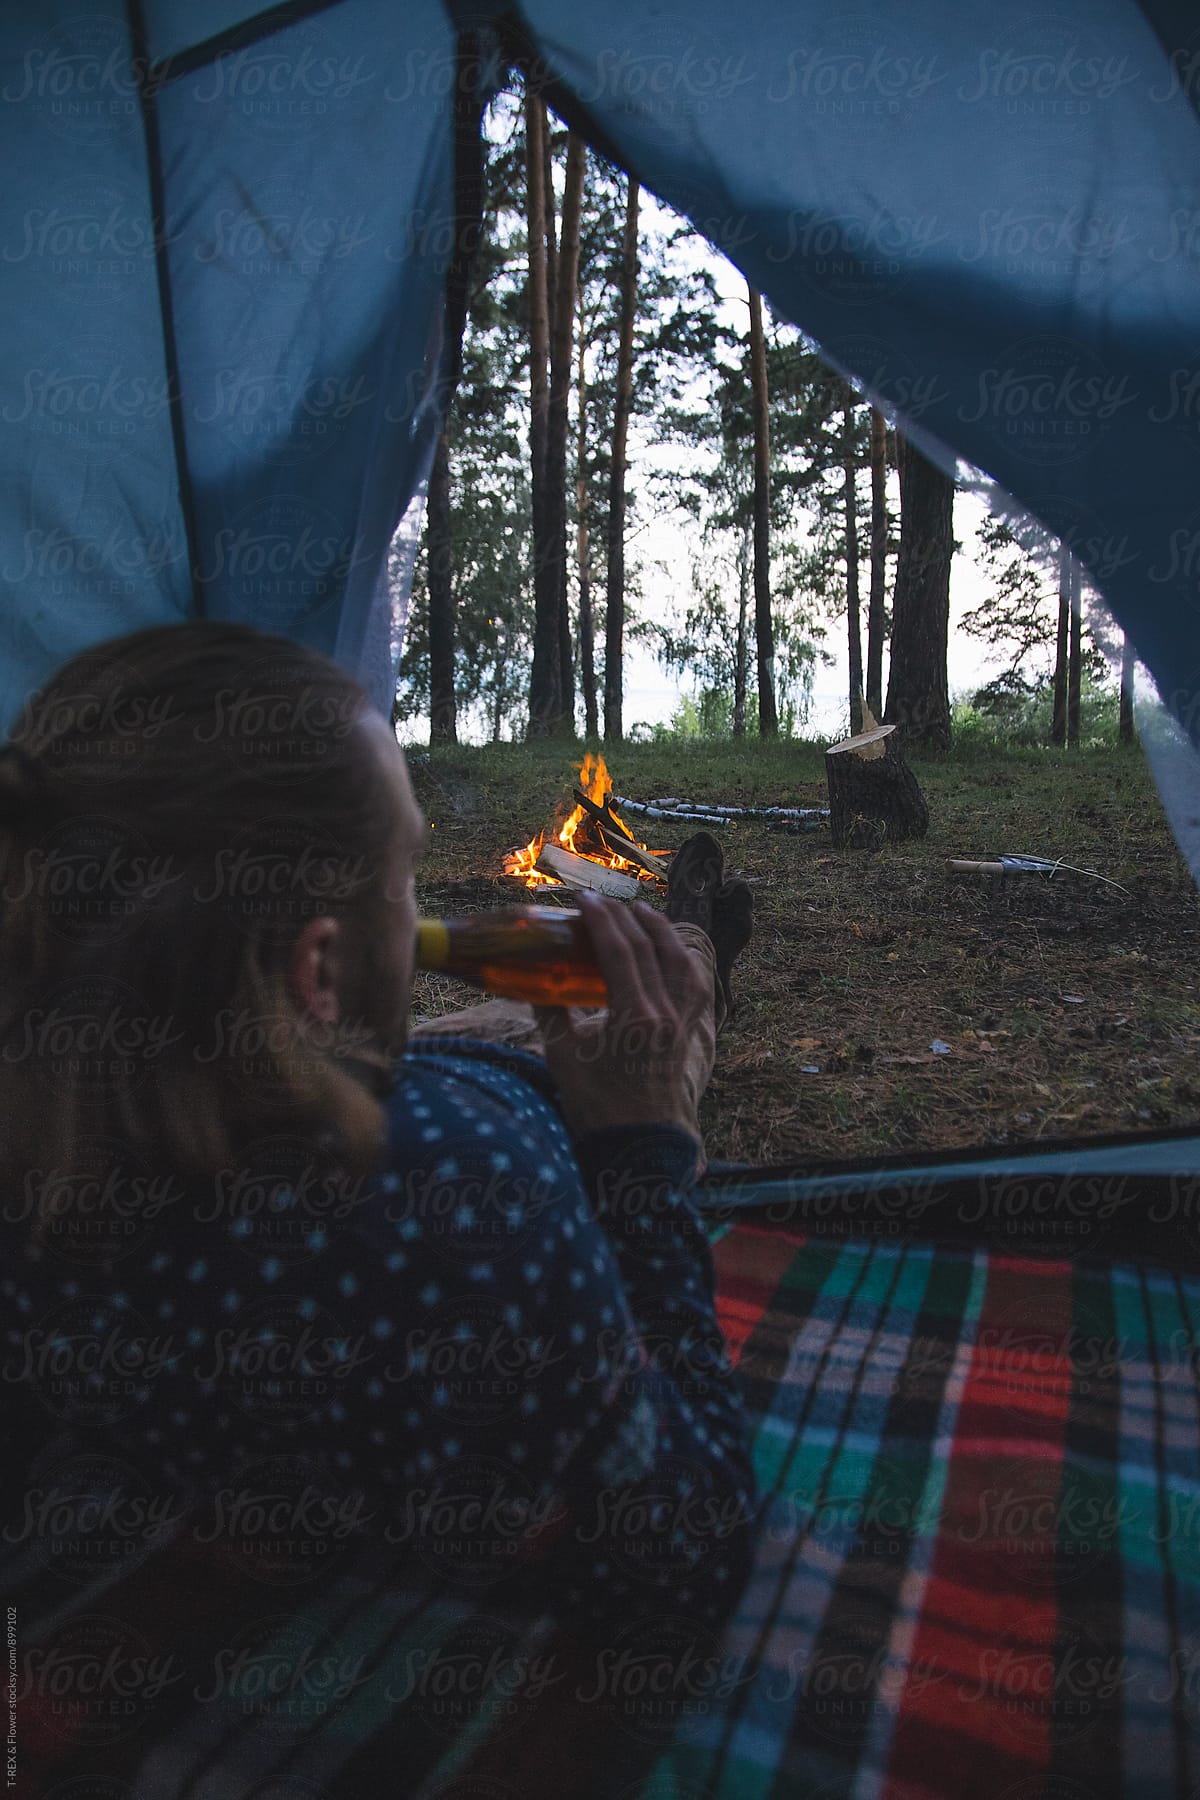 Man in tent drinking beer and looking at campfire